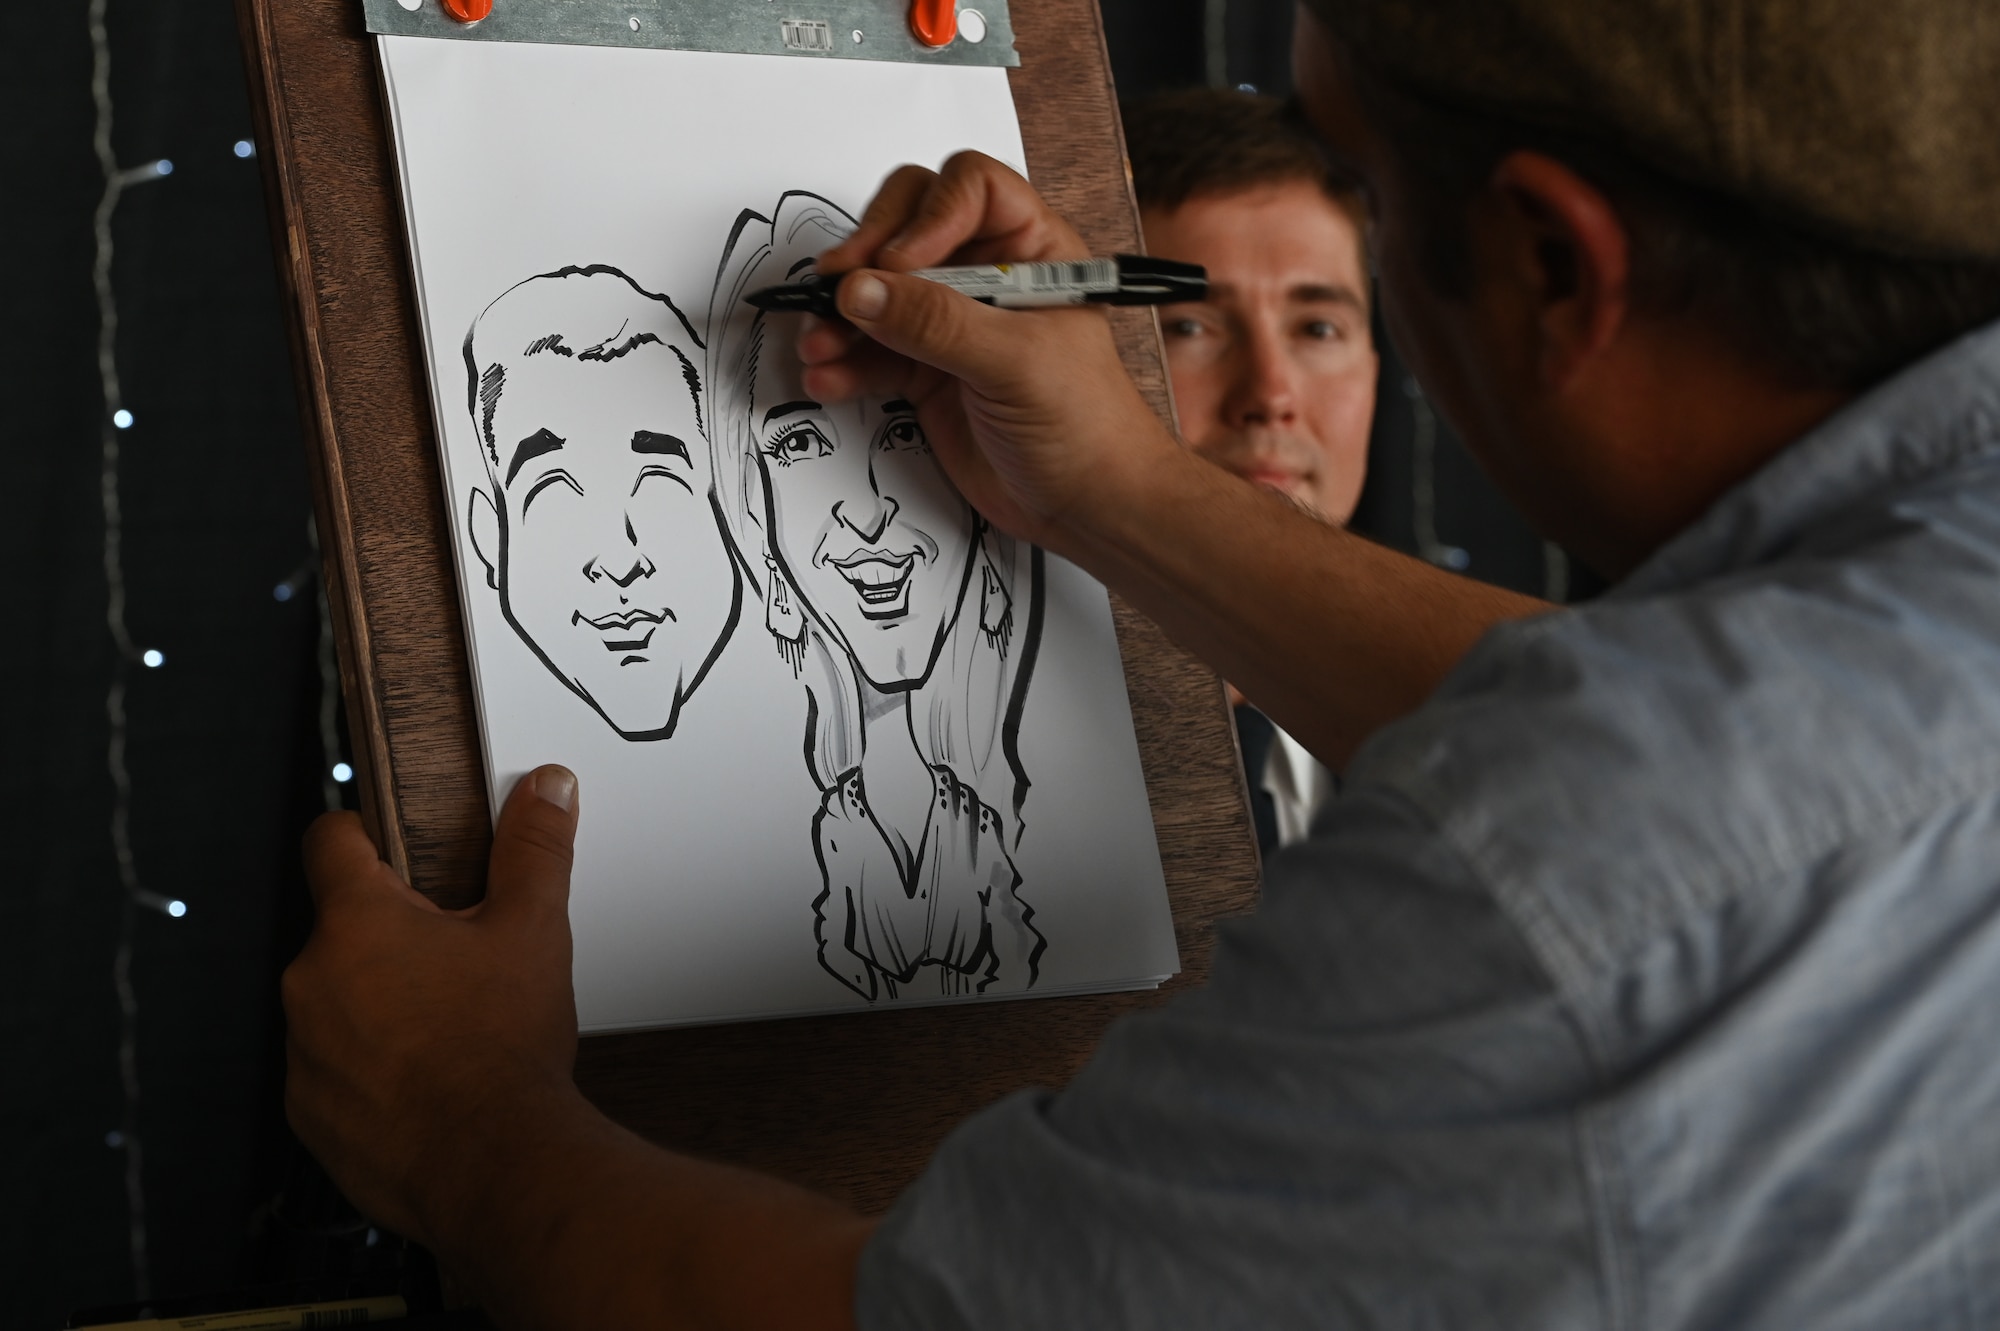 An artist draws a portrait of a couple at the Air Force Ball at Whiteman Air Force Base, Missouri, September 16, 2022. The AF Ball provided services such as drawn portraits and photo booths for Airmen to have souvenirs, remembering the event. (U.S. Air Force photo by Airman 1st Class Joseph Garcia)